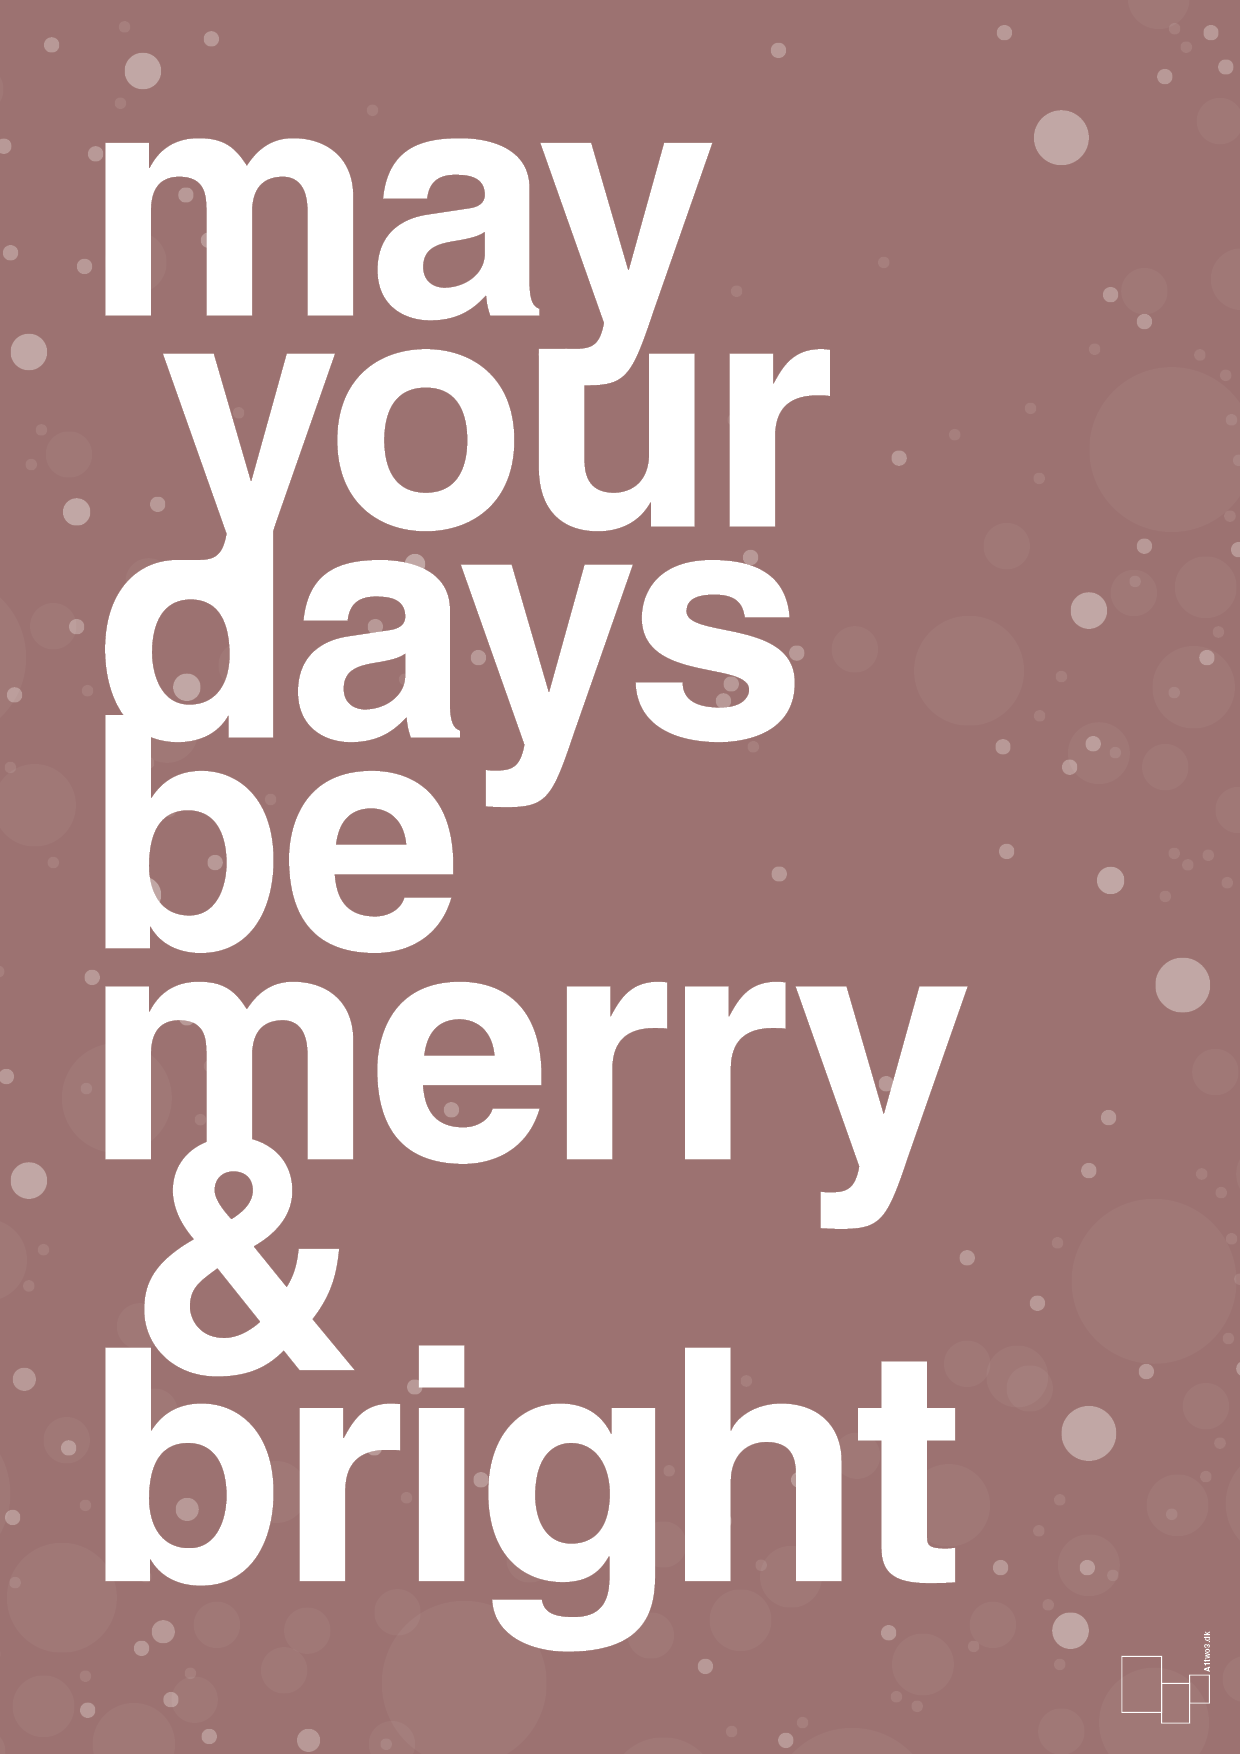 may your days be merry and bright - Plakat med Begivenheder i Plum